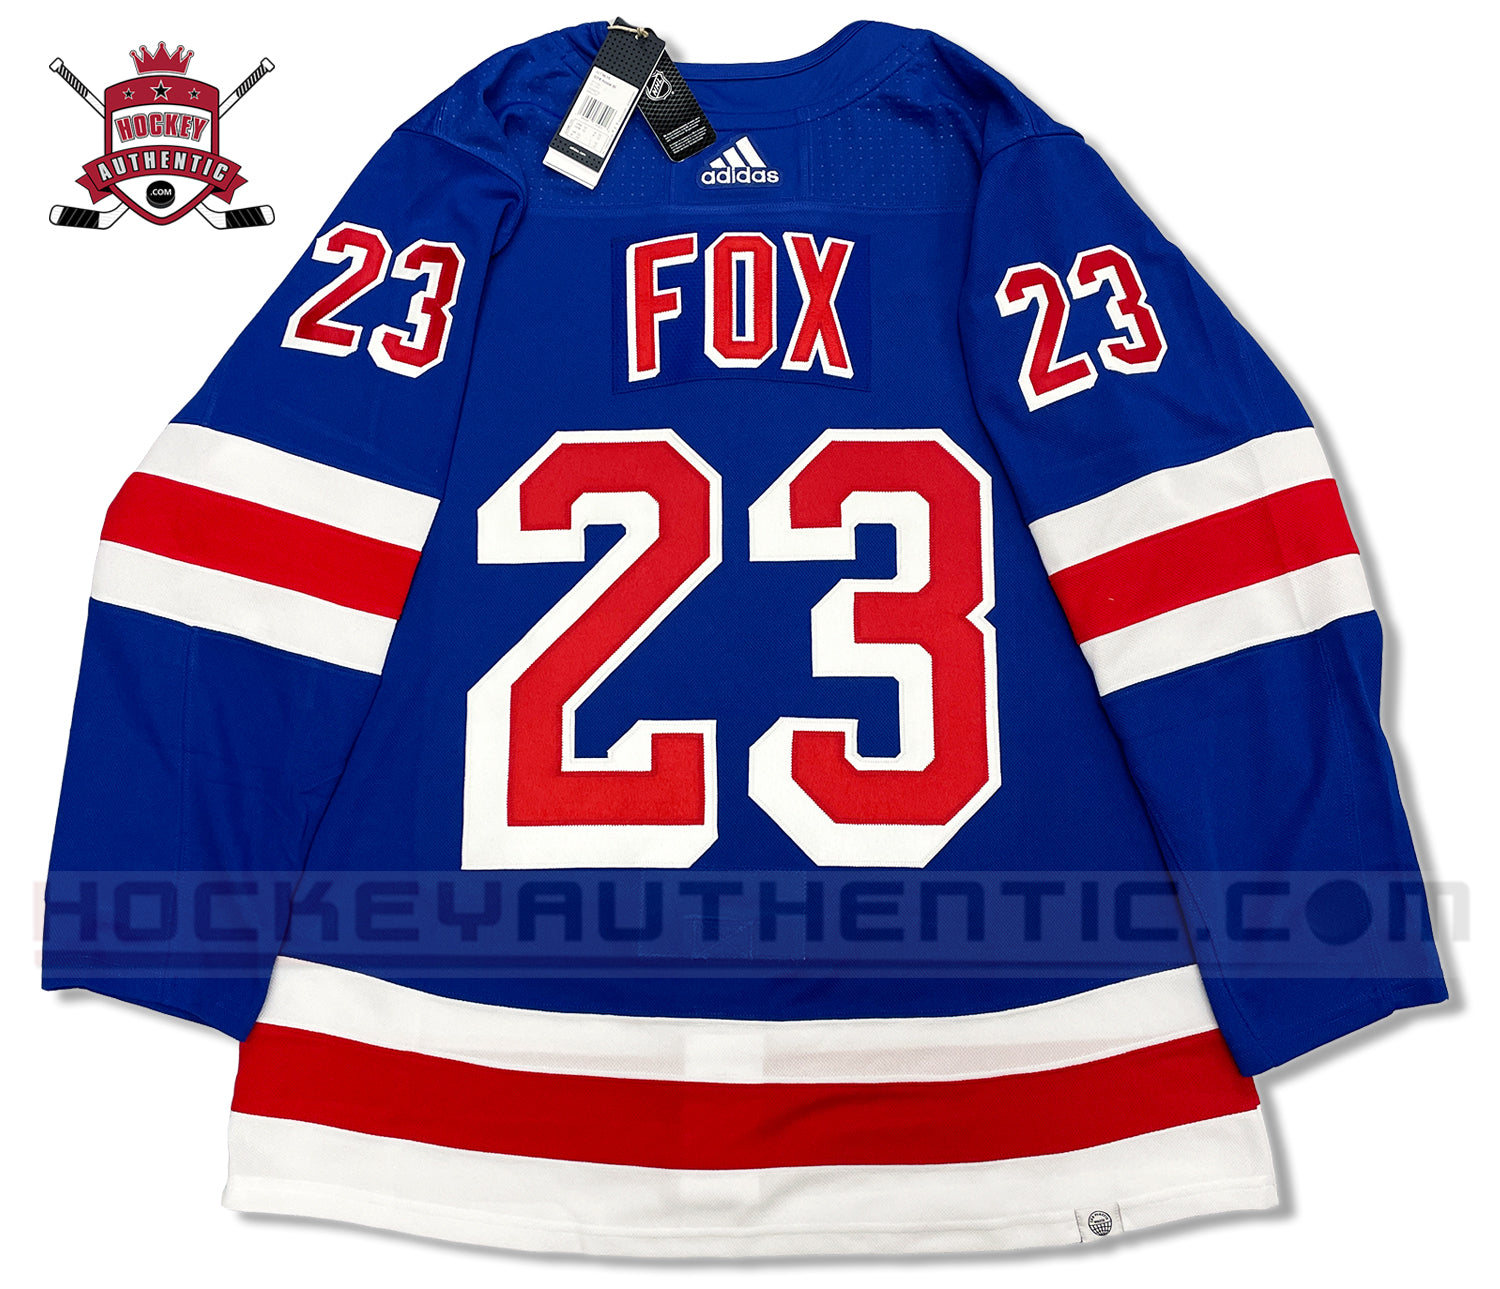 ANY NAME AND NUMBER NEW YORK RANGERS HOME OR AWAY AUTHENTIC ADIDAS